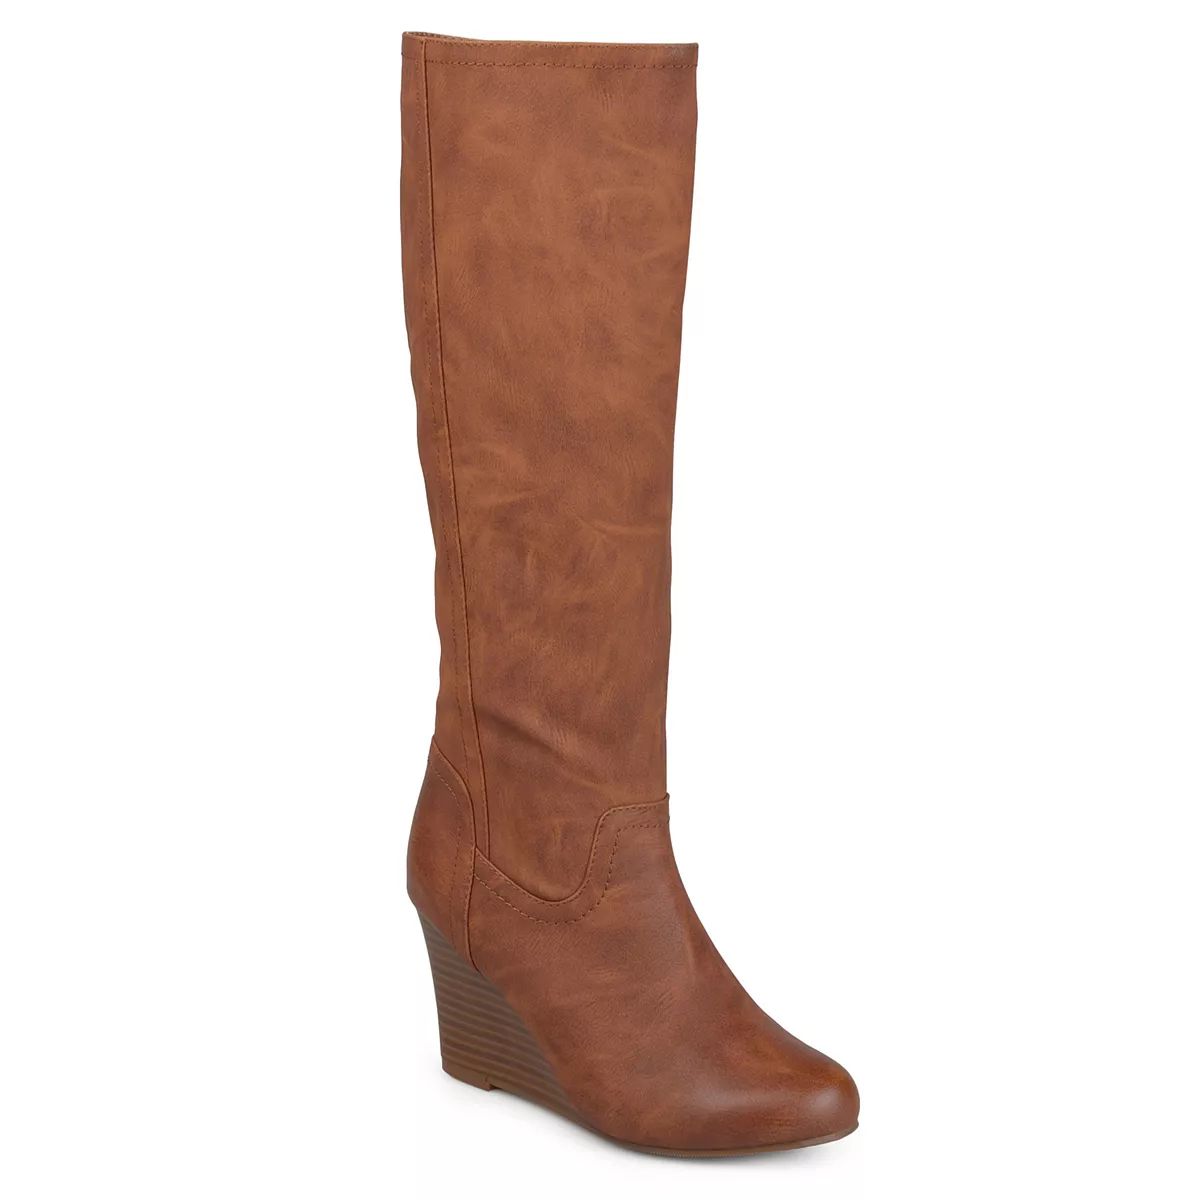 Journee Collection Langly Women's Wedge Knee High Boots | Kohl's